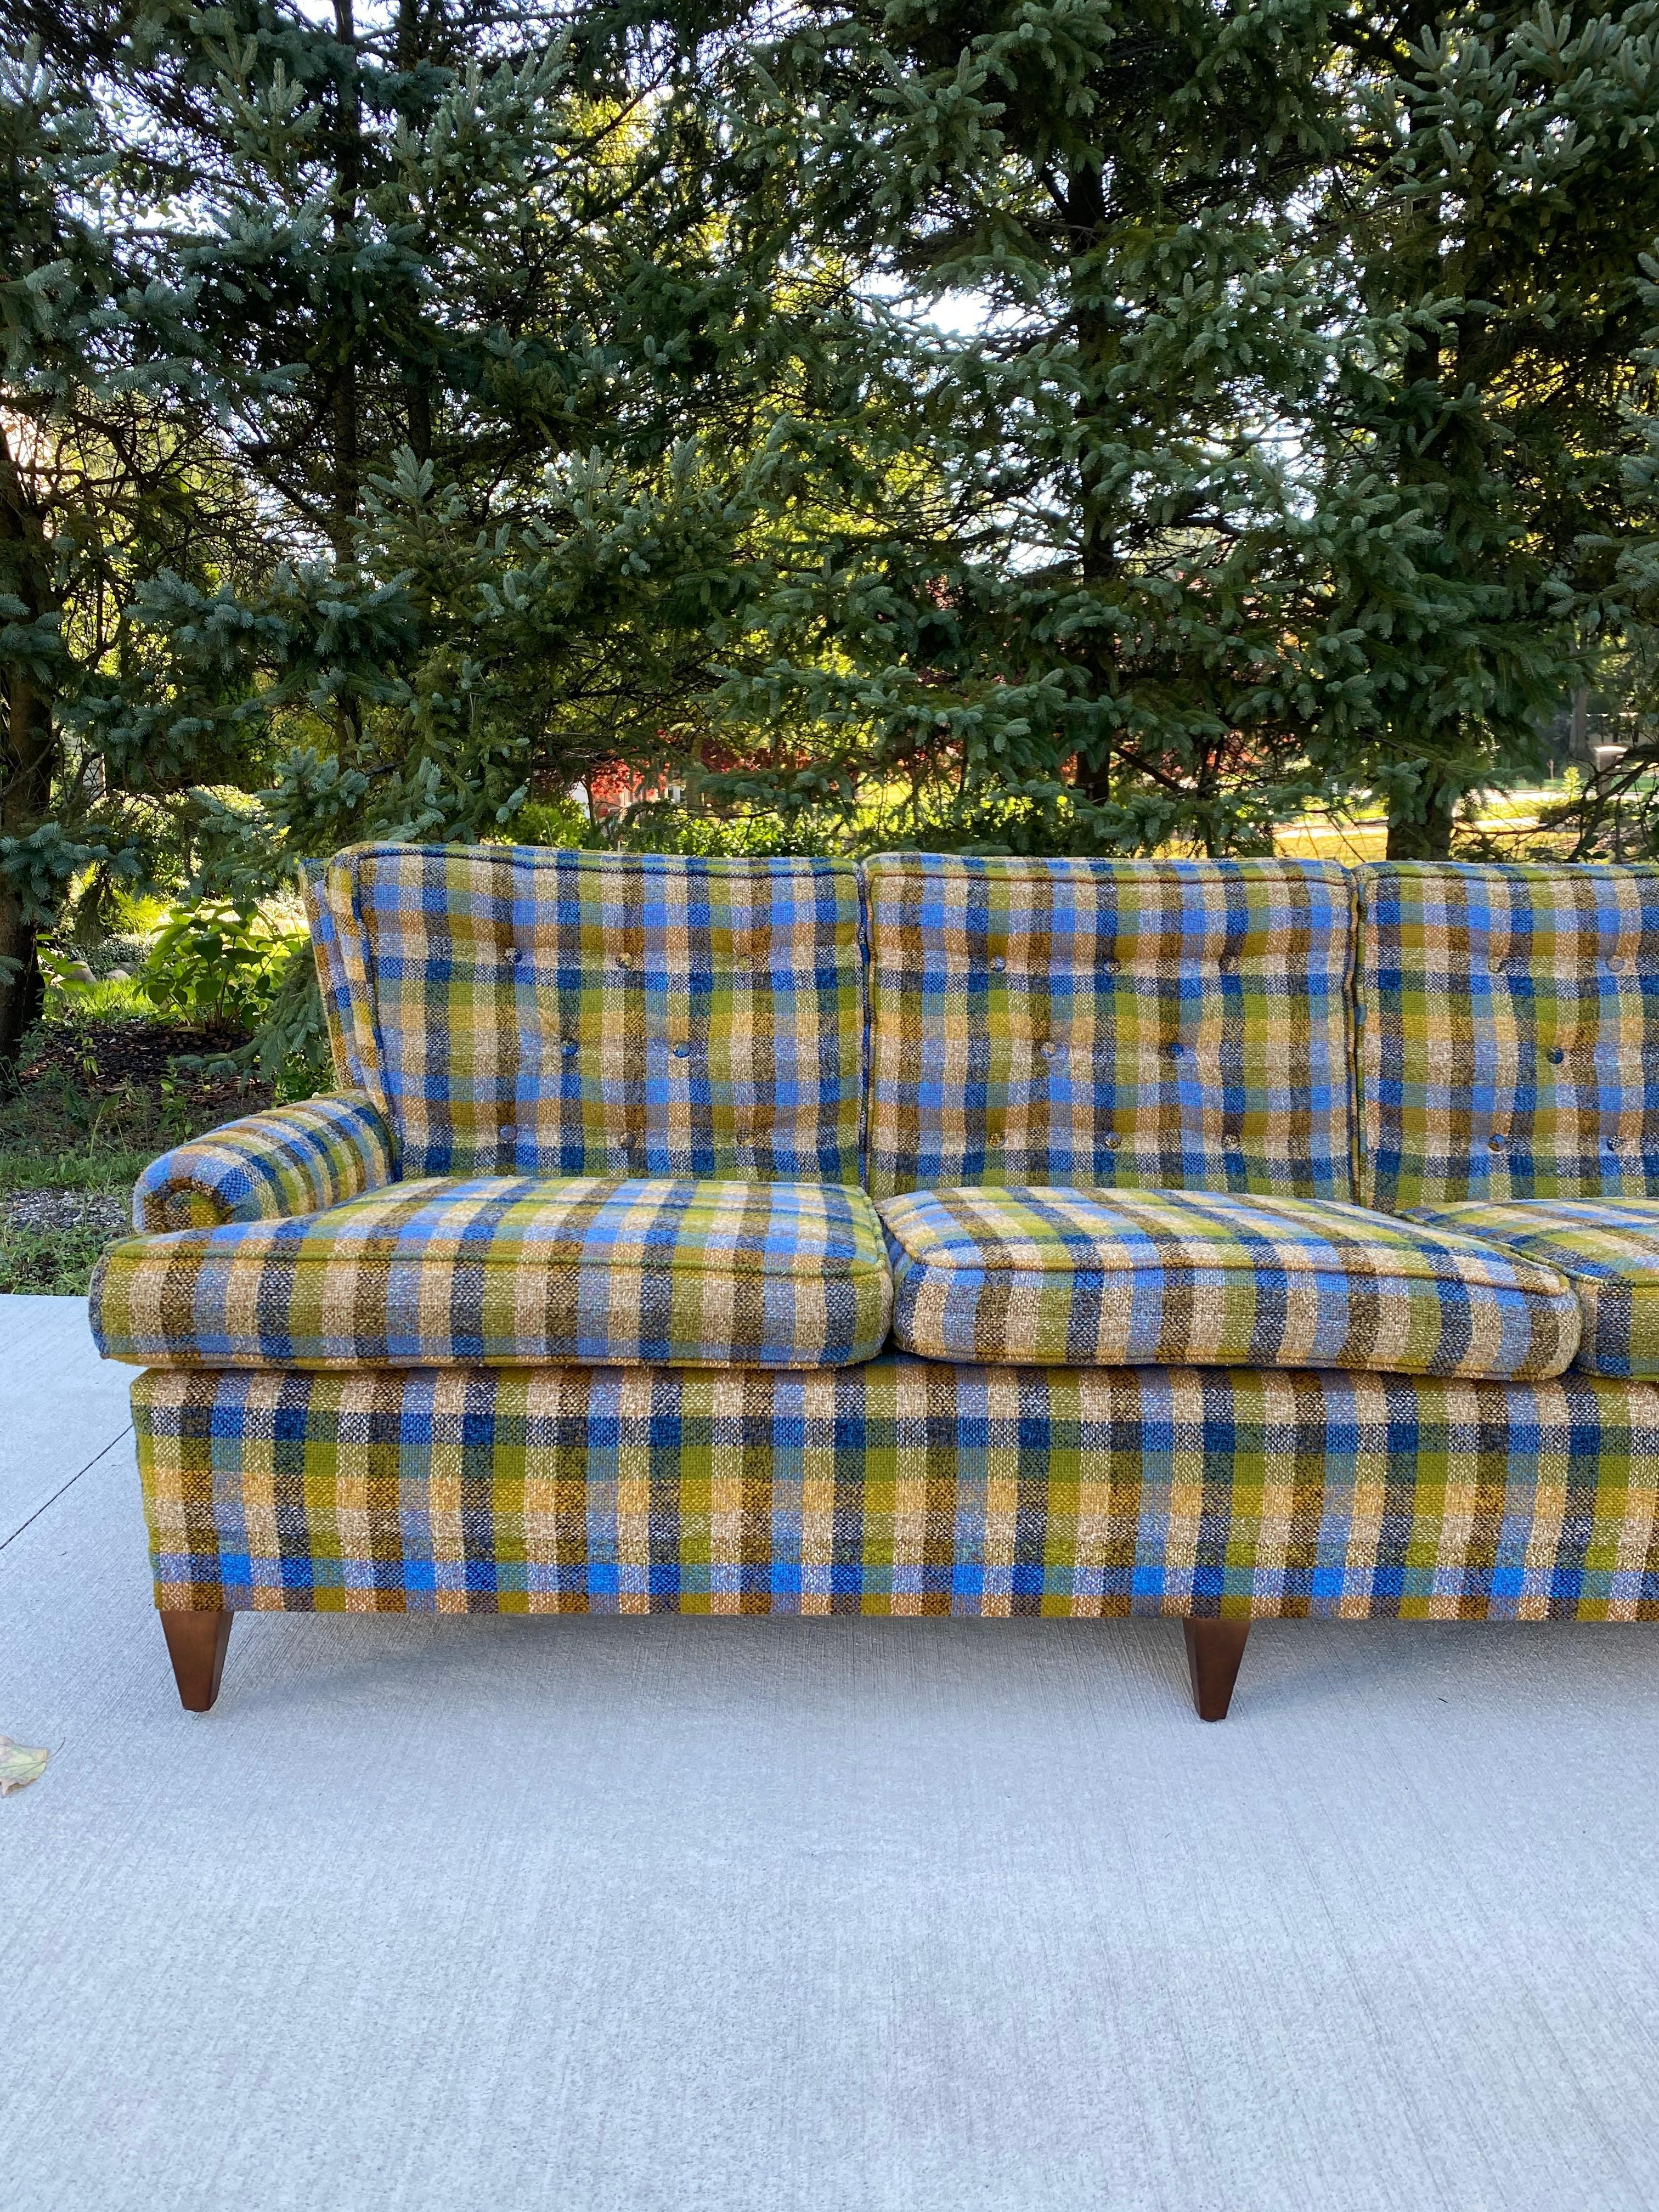 A gorgeous Mid-Century Modern green plaid 3-seater sofa in an amazing condition. Truly a statement piece with its fabric, tufted back cushions, curved back and Mid-Century Modern legs. Make this sofa a statement piece in your home!